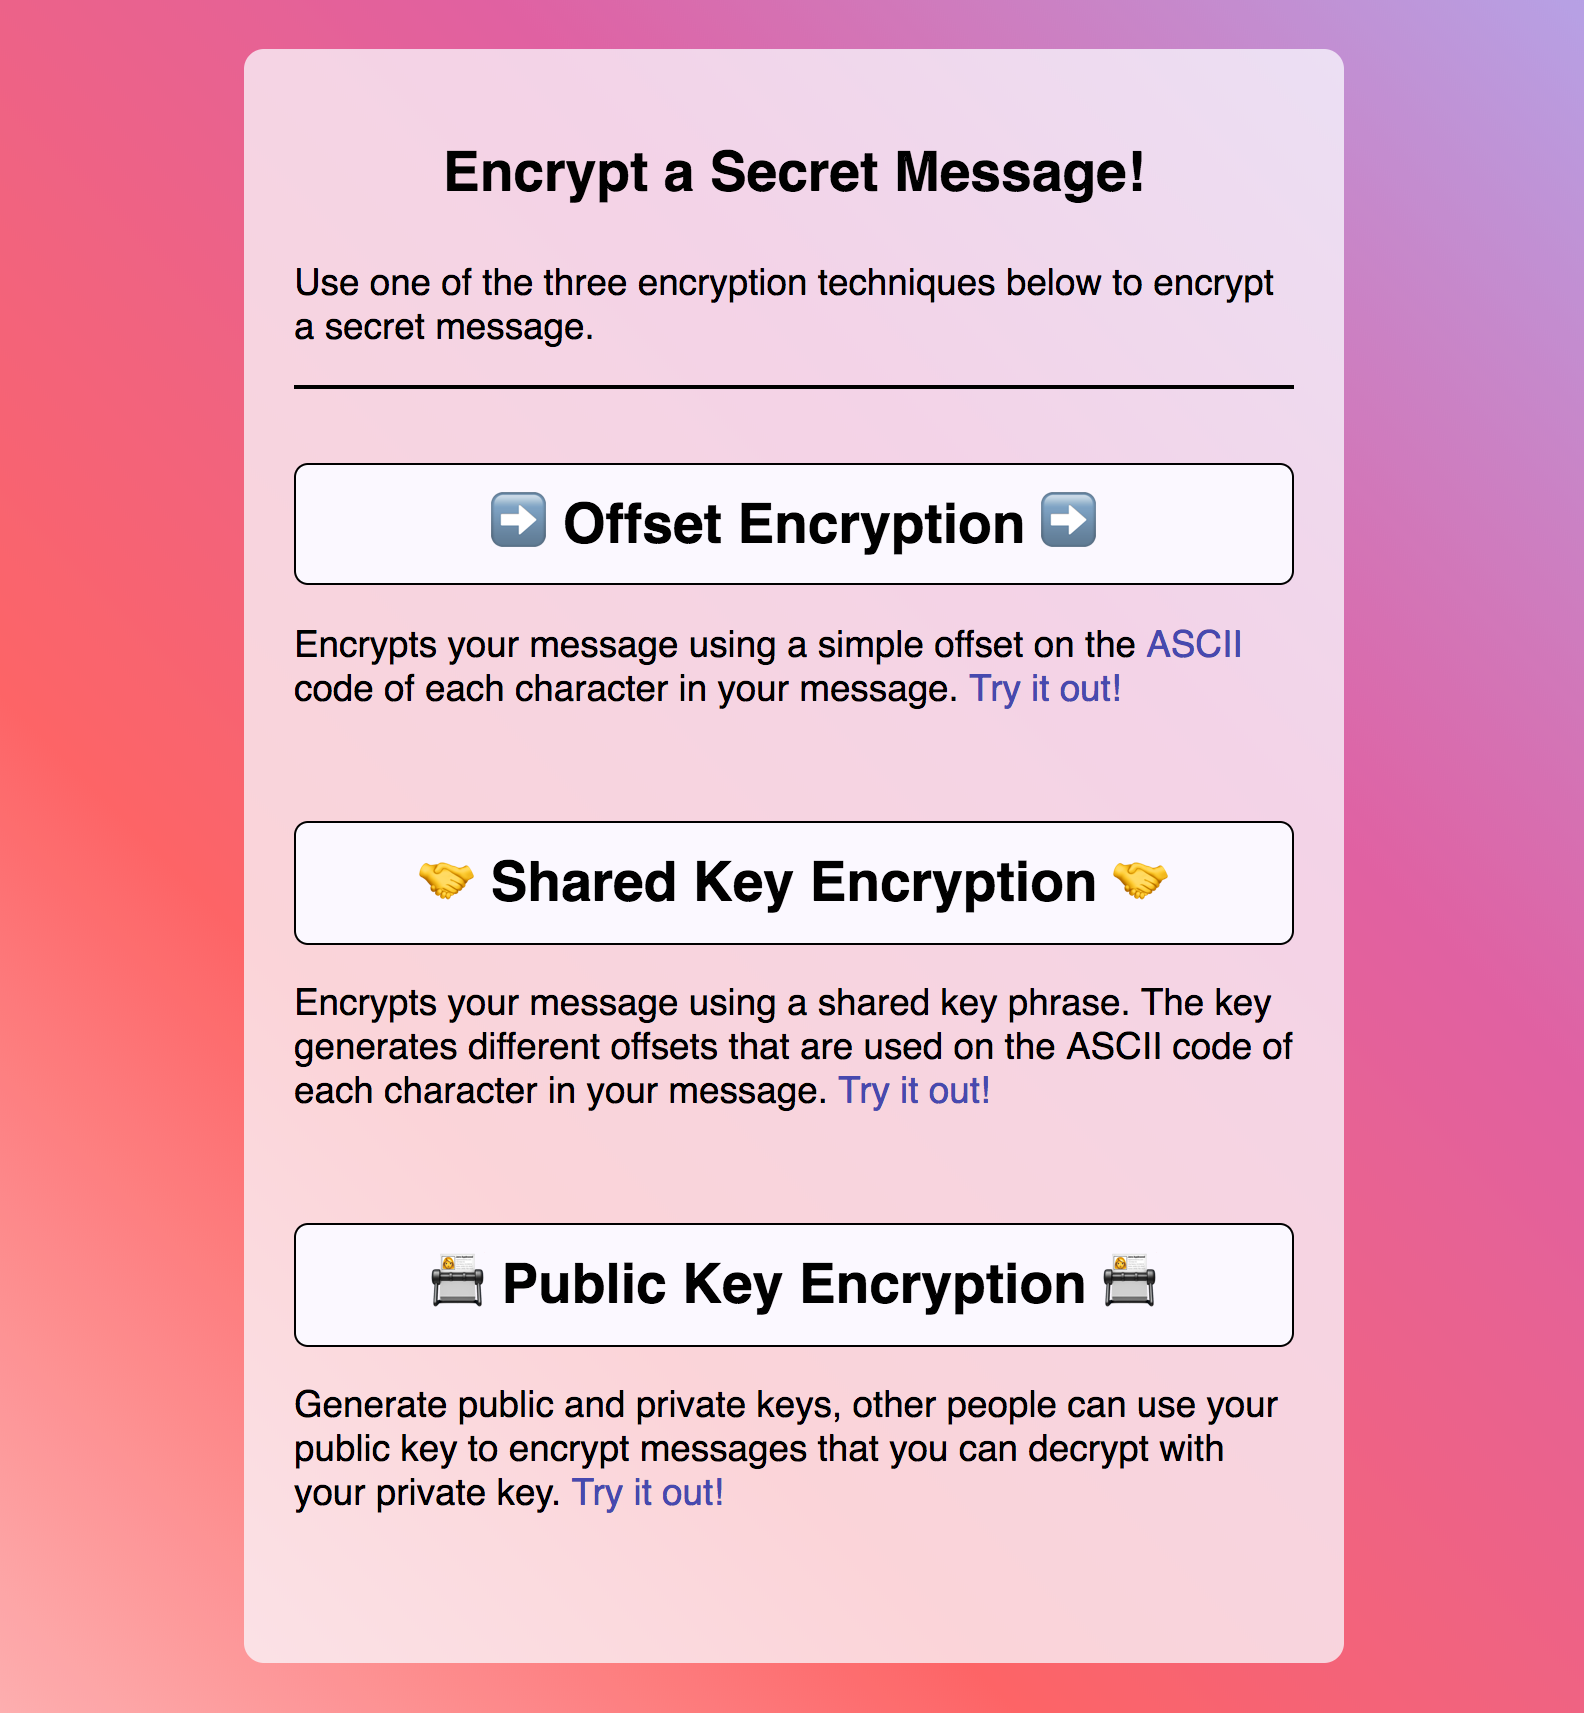 A screenshot of the app showing 3 options, Offset Encryption, Shared Key Encryption, and Public Key Encryption